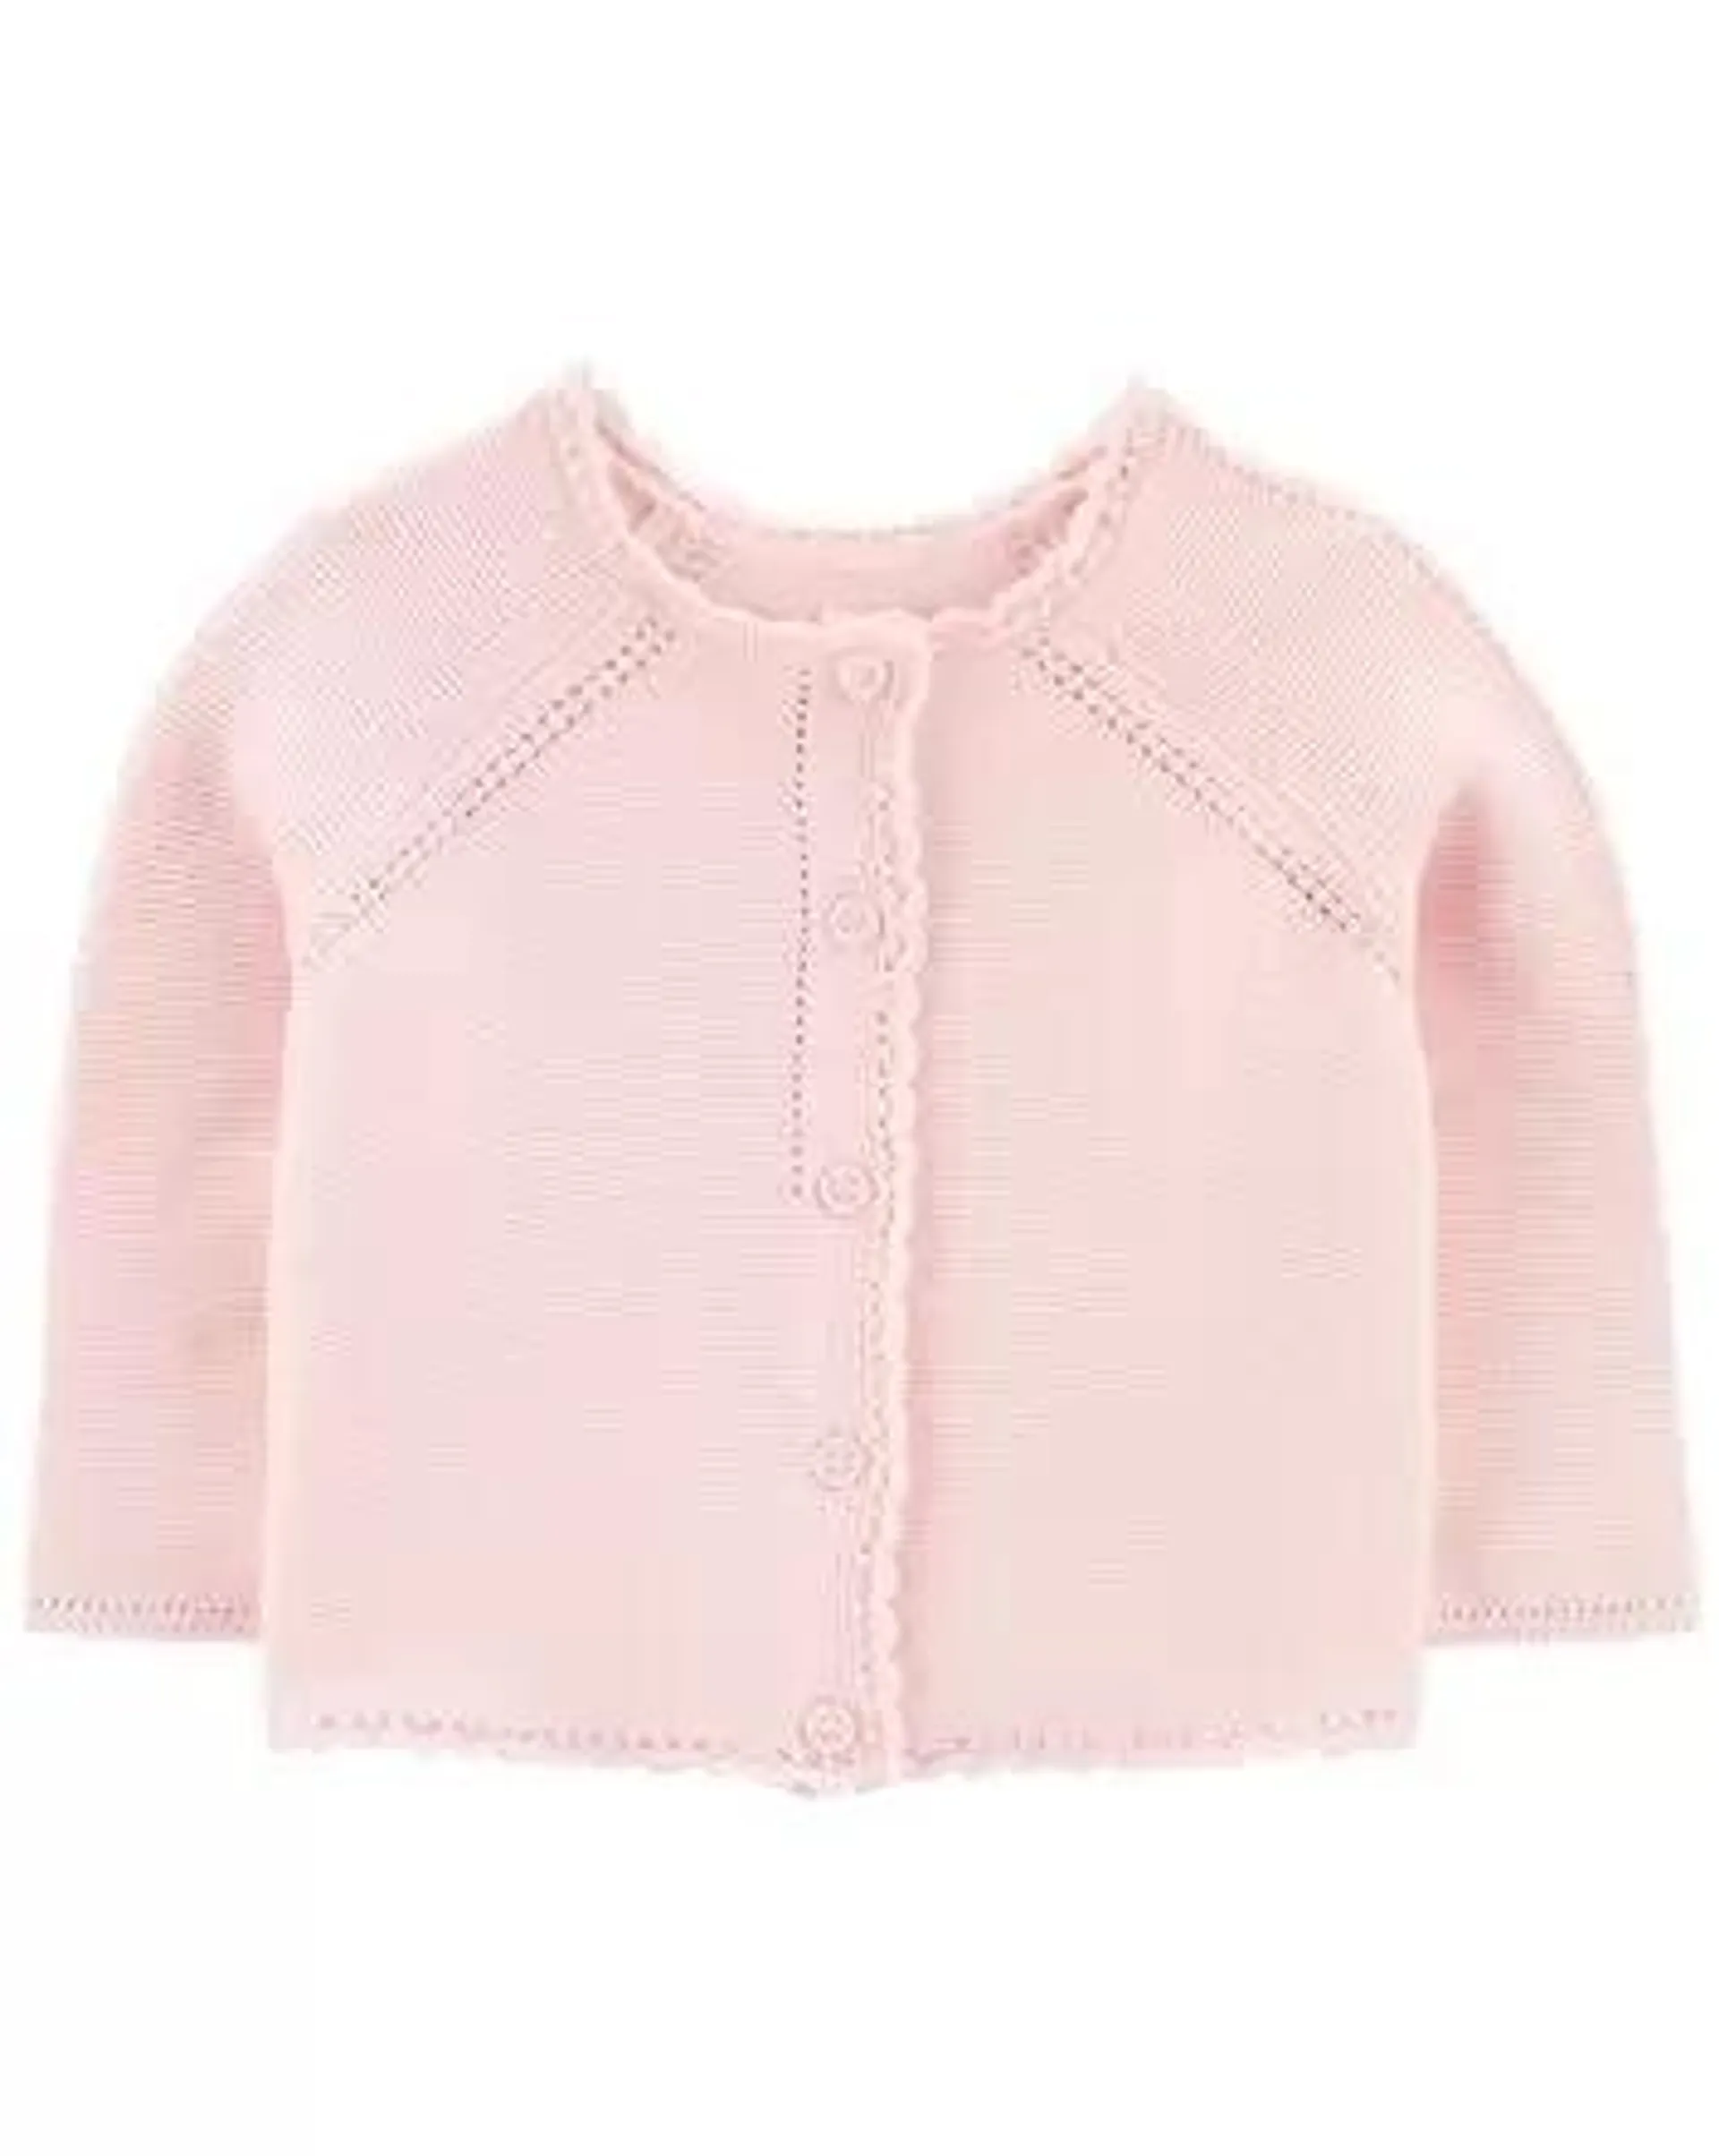 Baby Scalloped Sweater Knit Cardigan